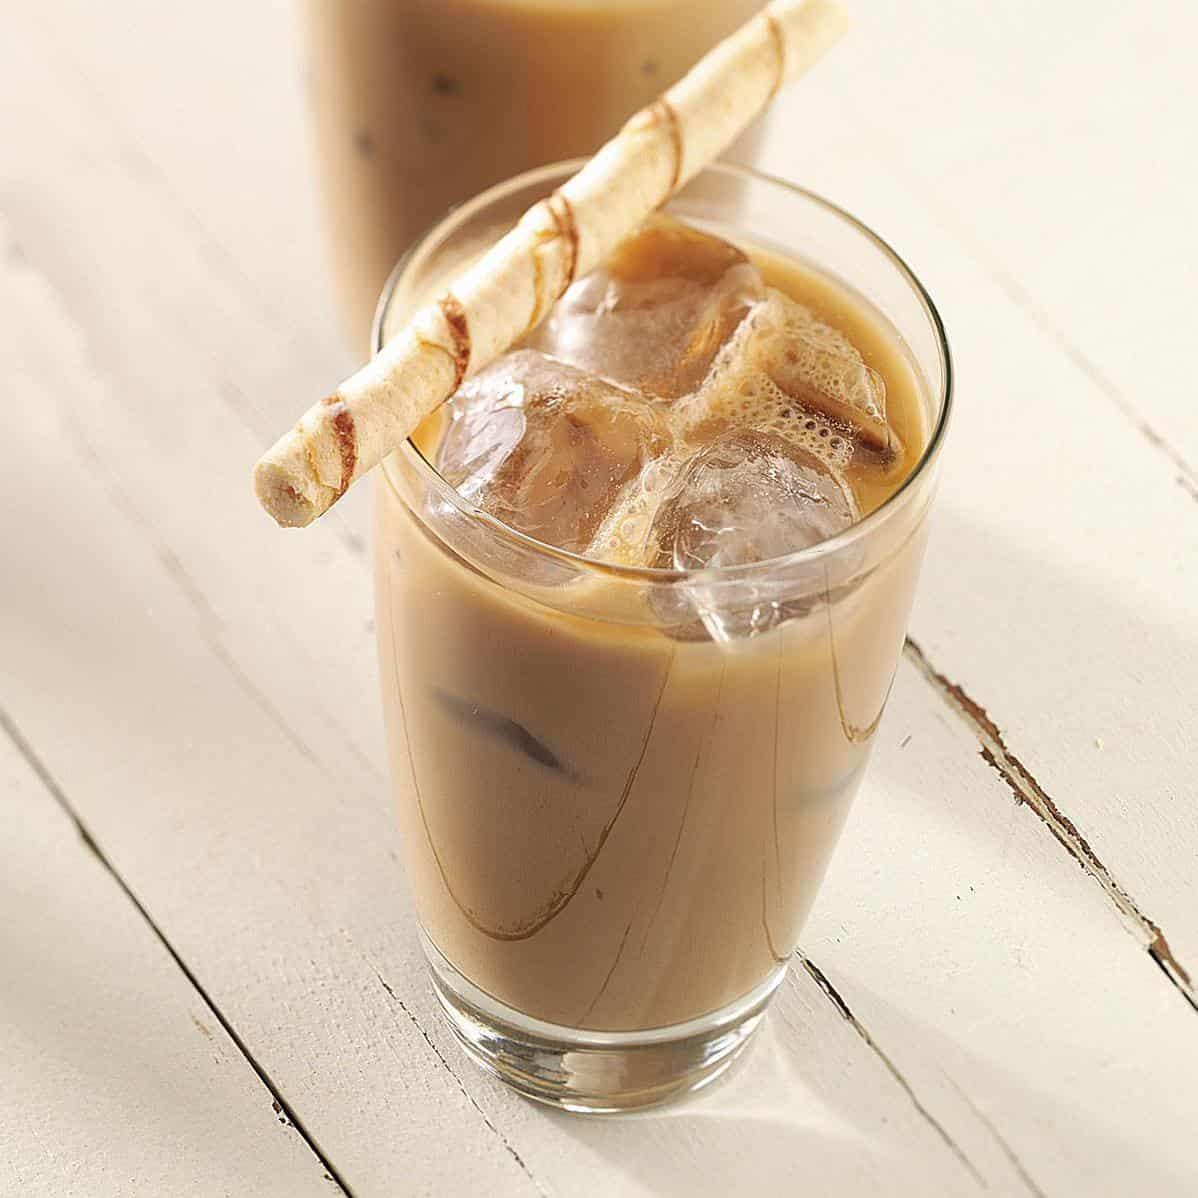 Refreshing Iced Caffe Latte Recipe for Summer Days